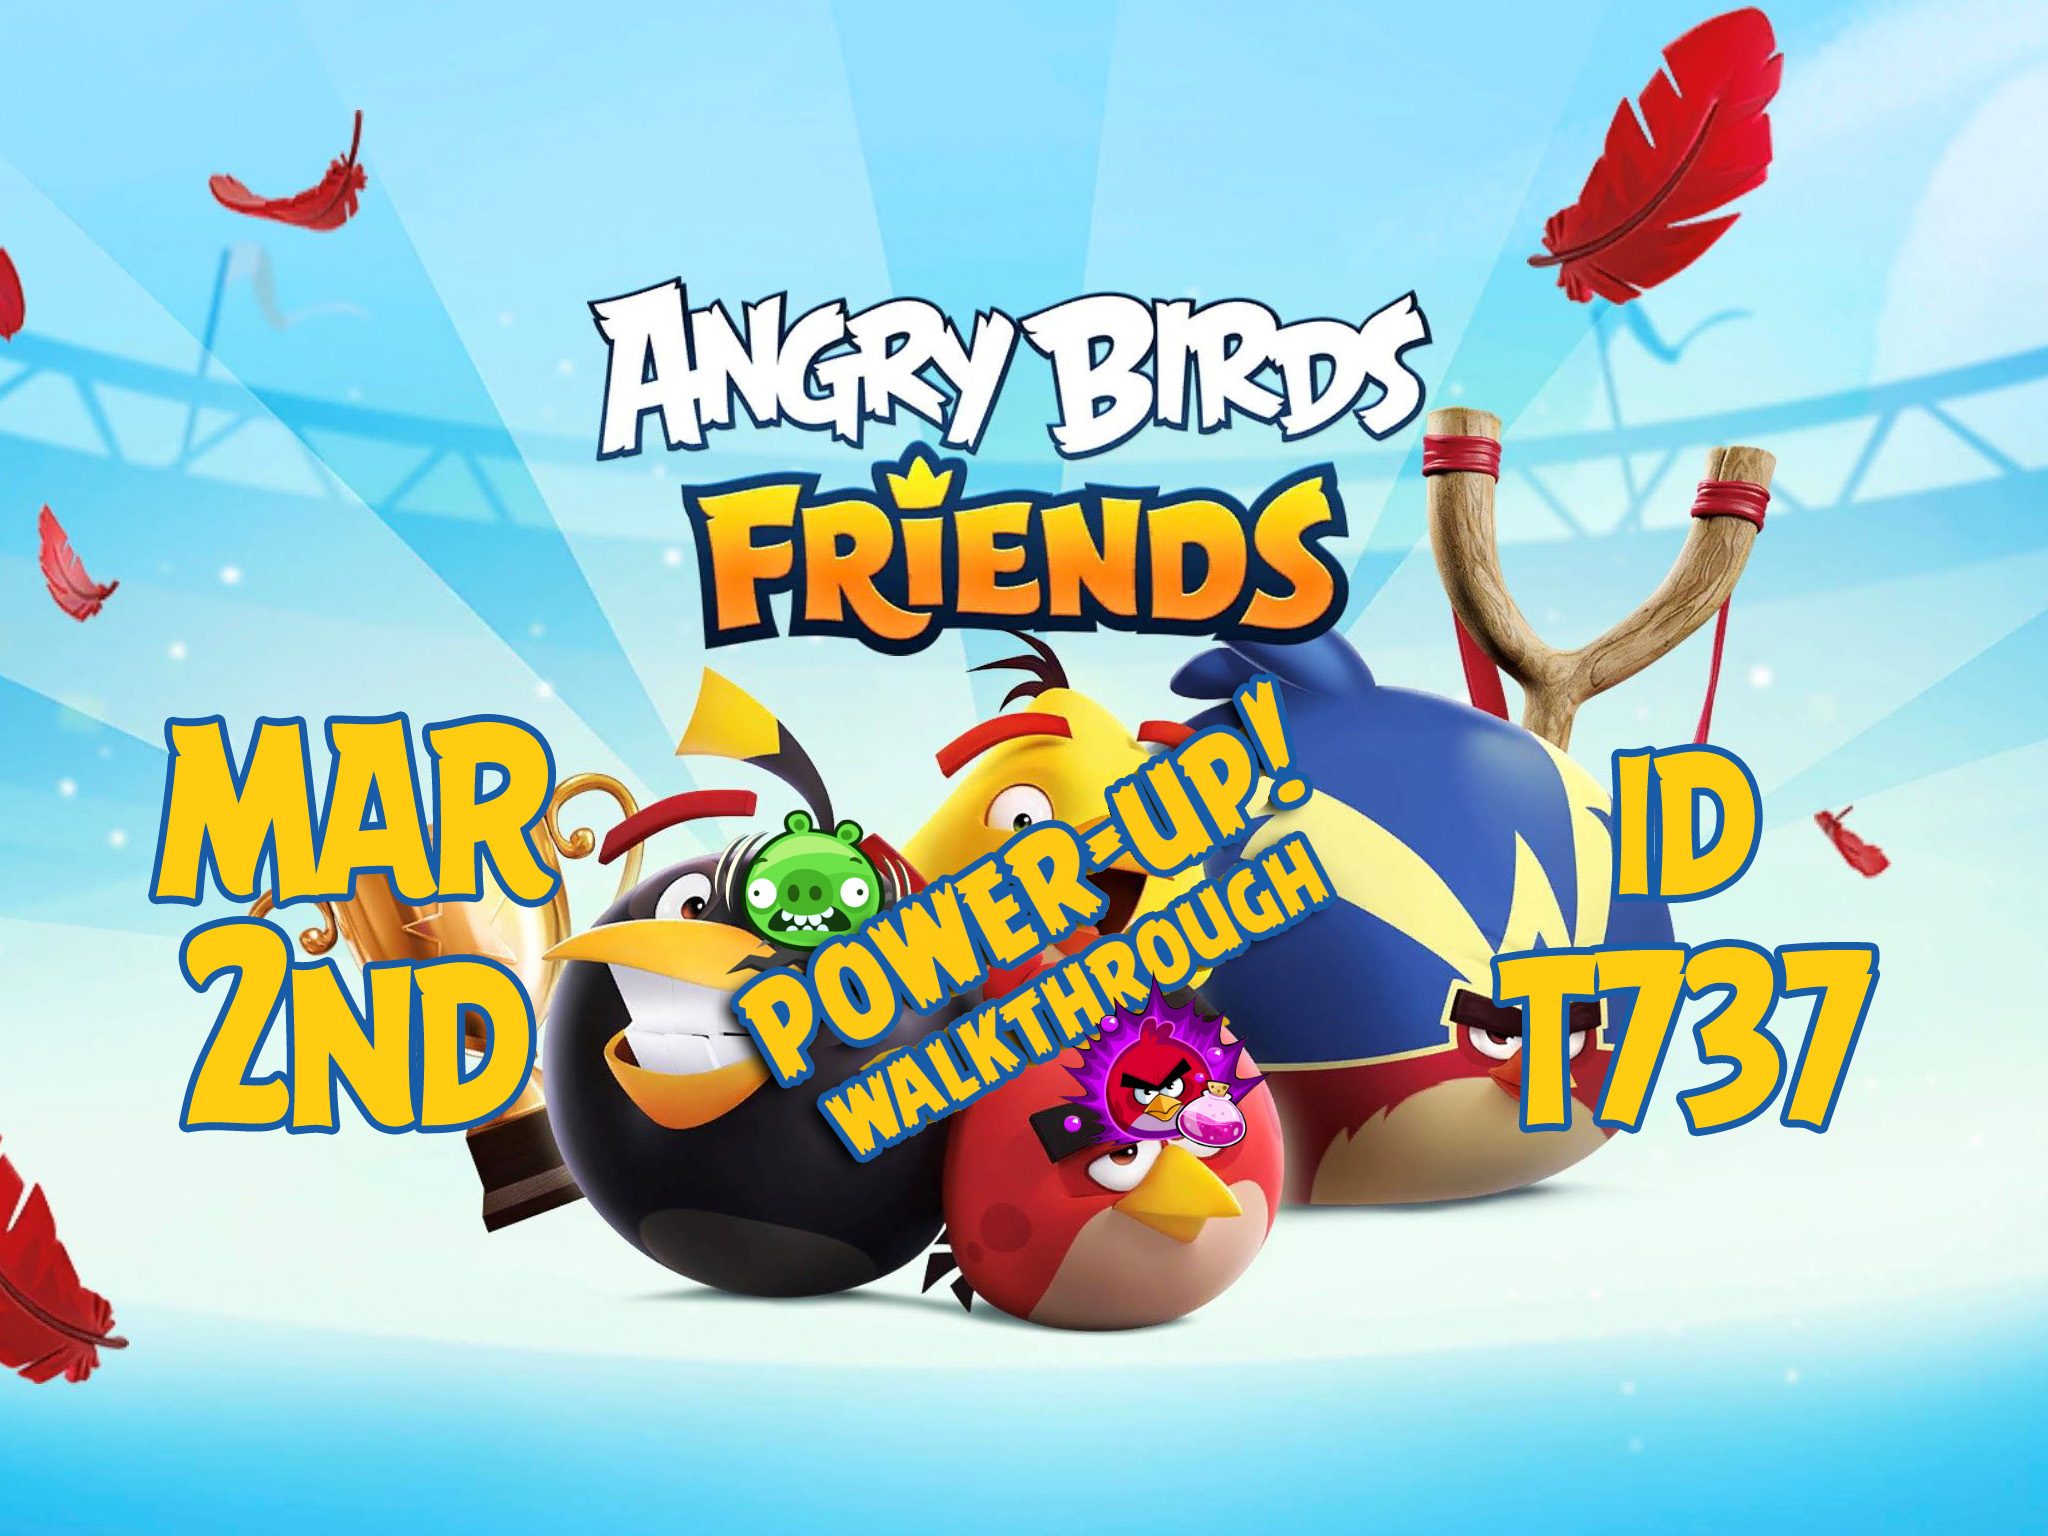 Angry-Birds-Friends-Tournament-T737c-Feature-Image-PU